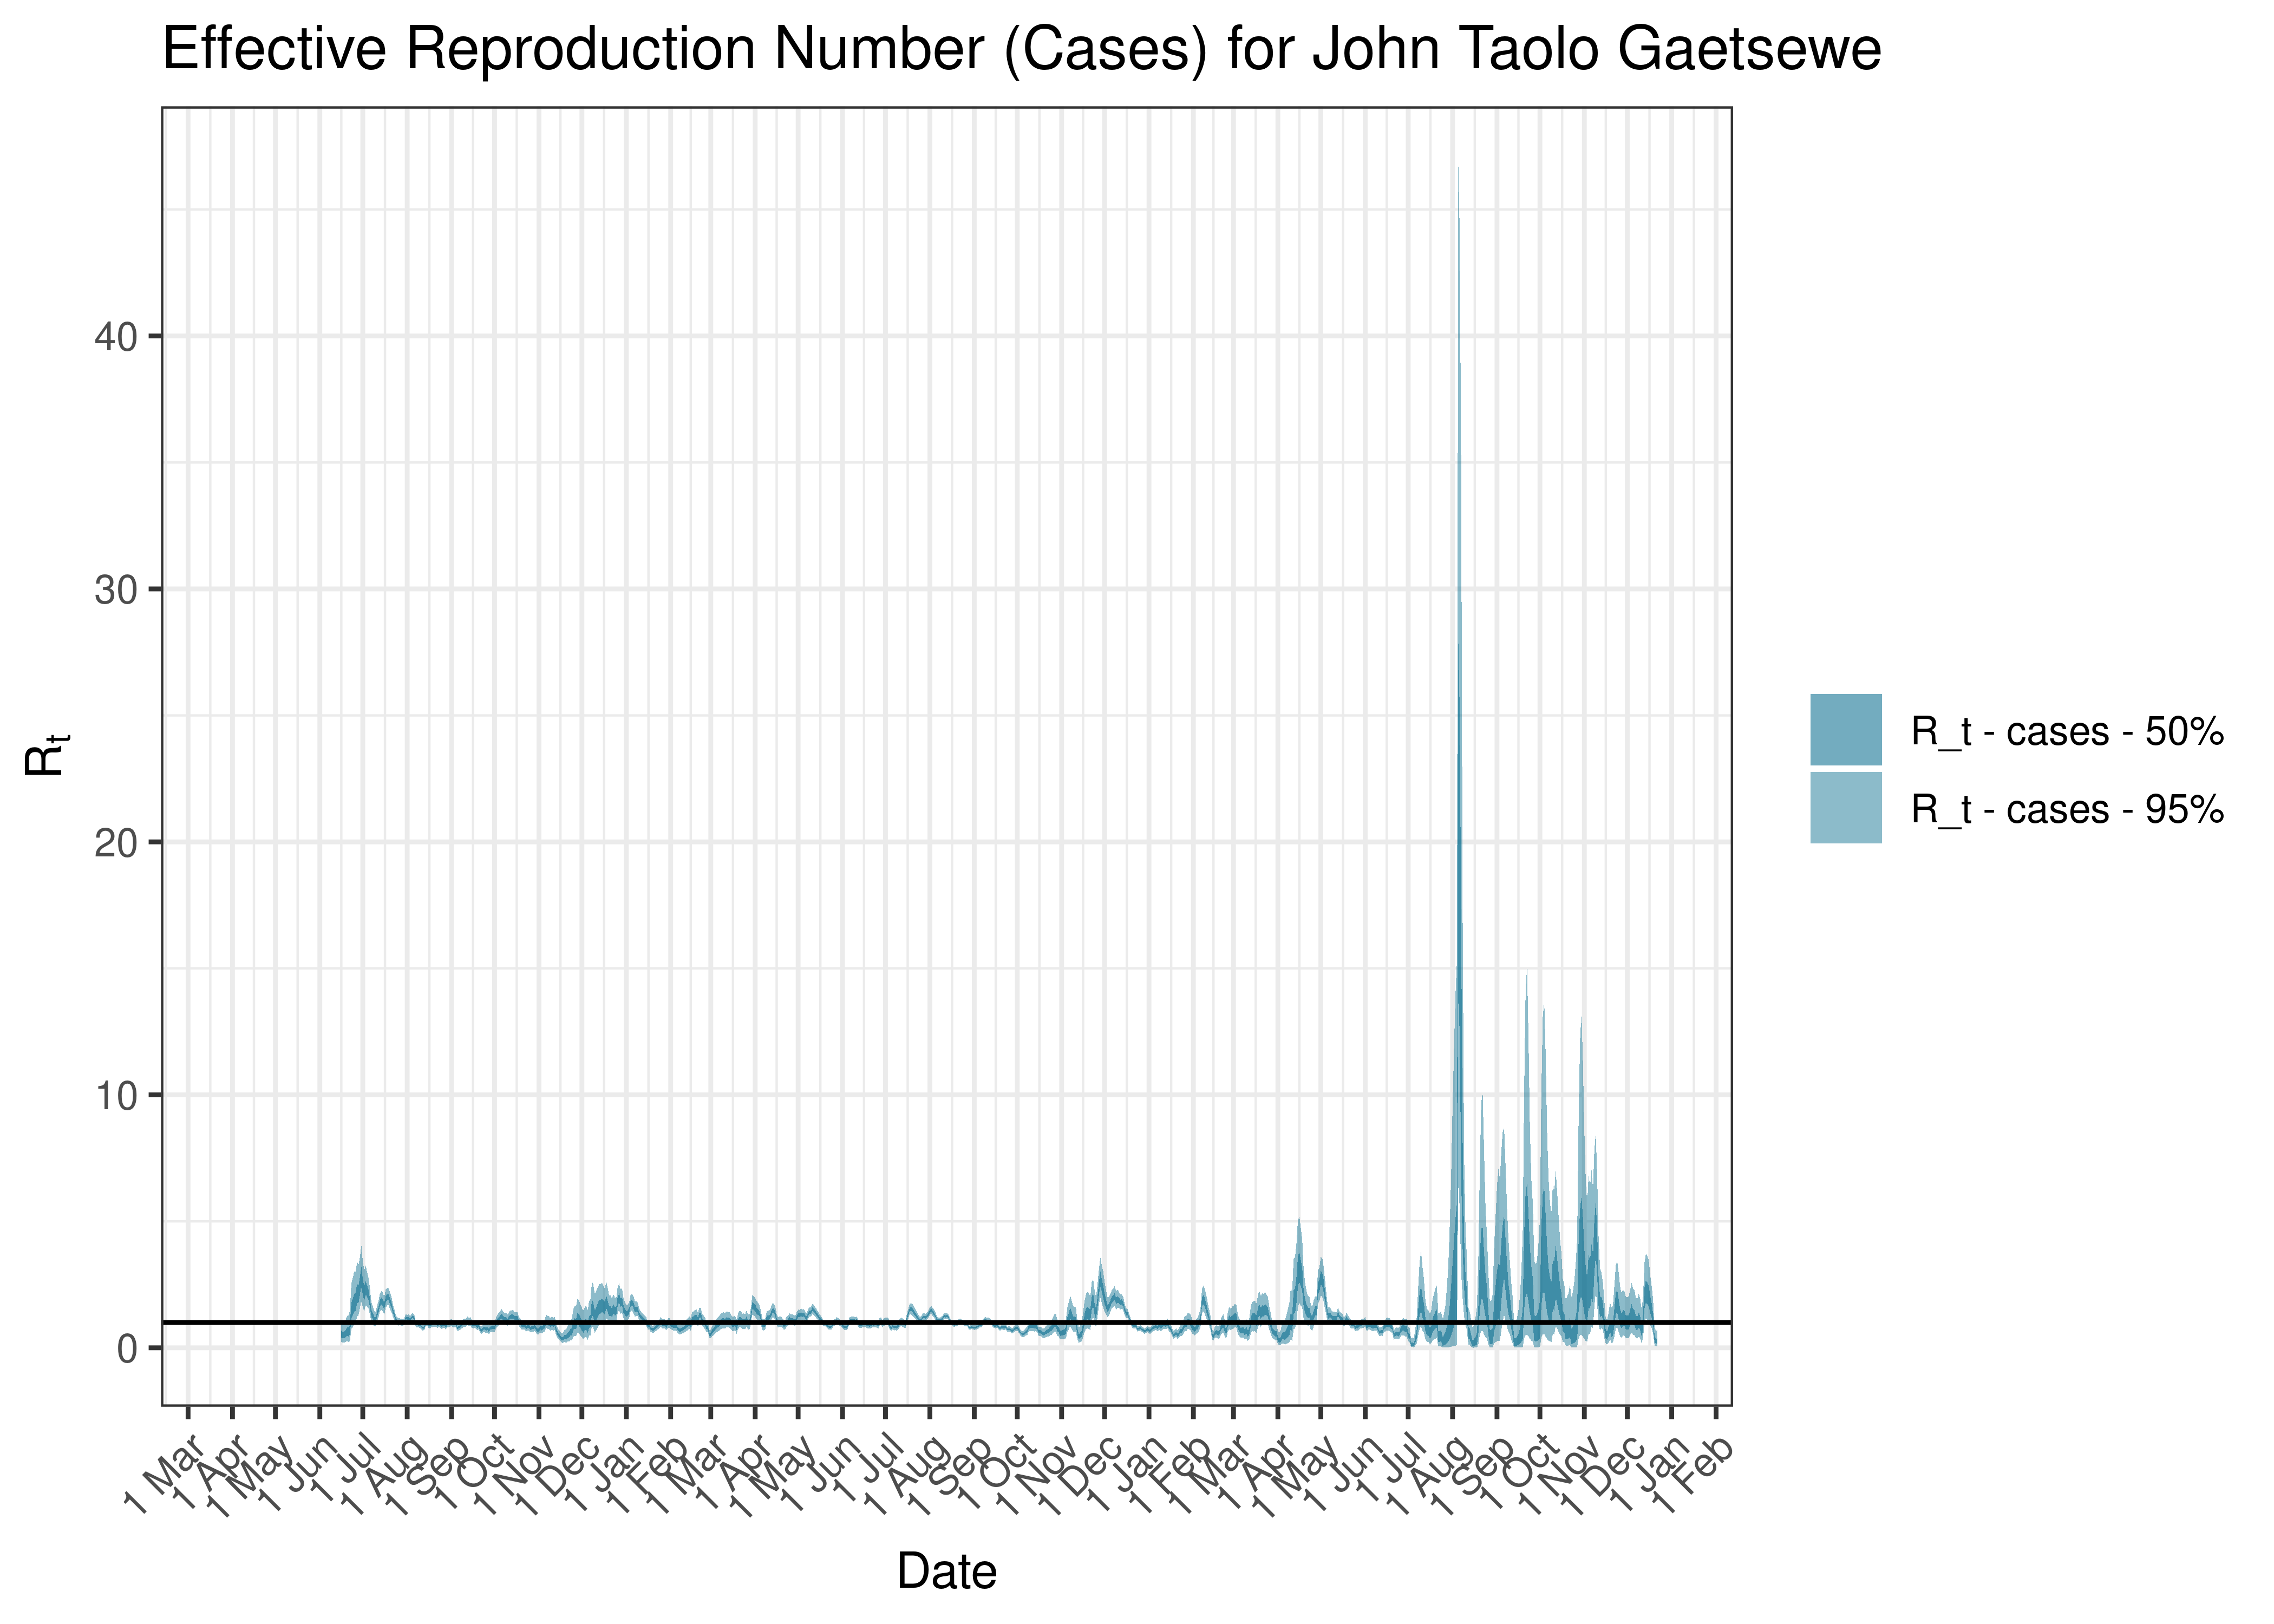 Estimated Effective Reproduction Number Based on Cases for John Taolo Gaetsewe since 1 April 2020